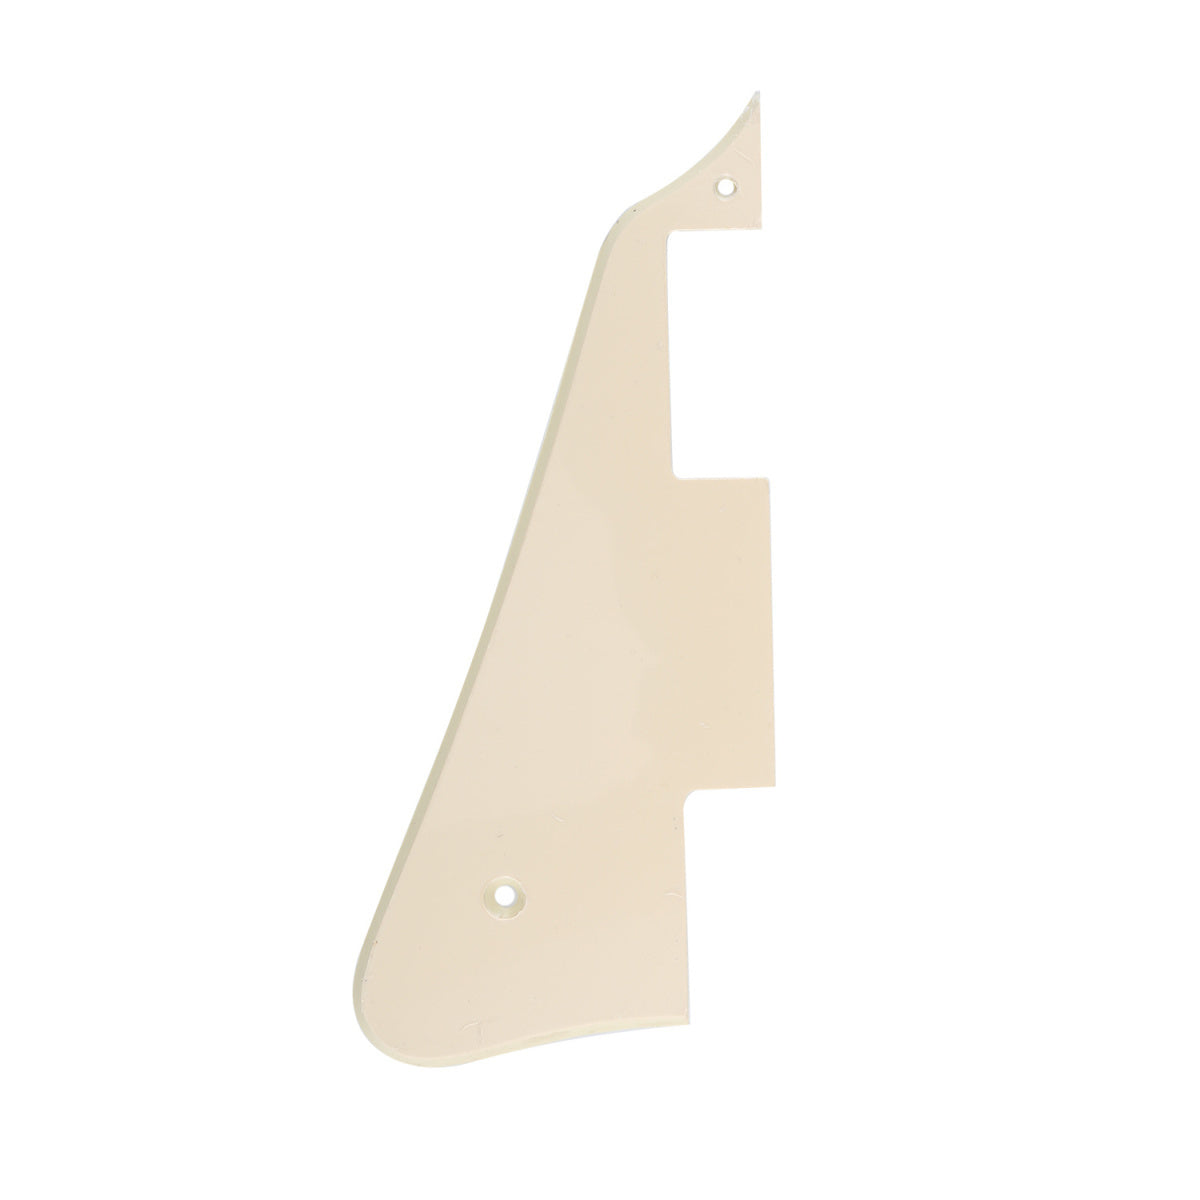 Musiclily Pro Left Handed Plastic Guitar Pickguard for 2006-Present Modern Style Epiphone Les Paul Guitar, 1Ply Cream